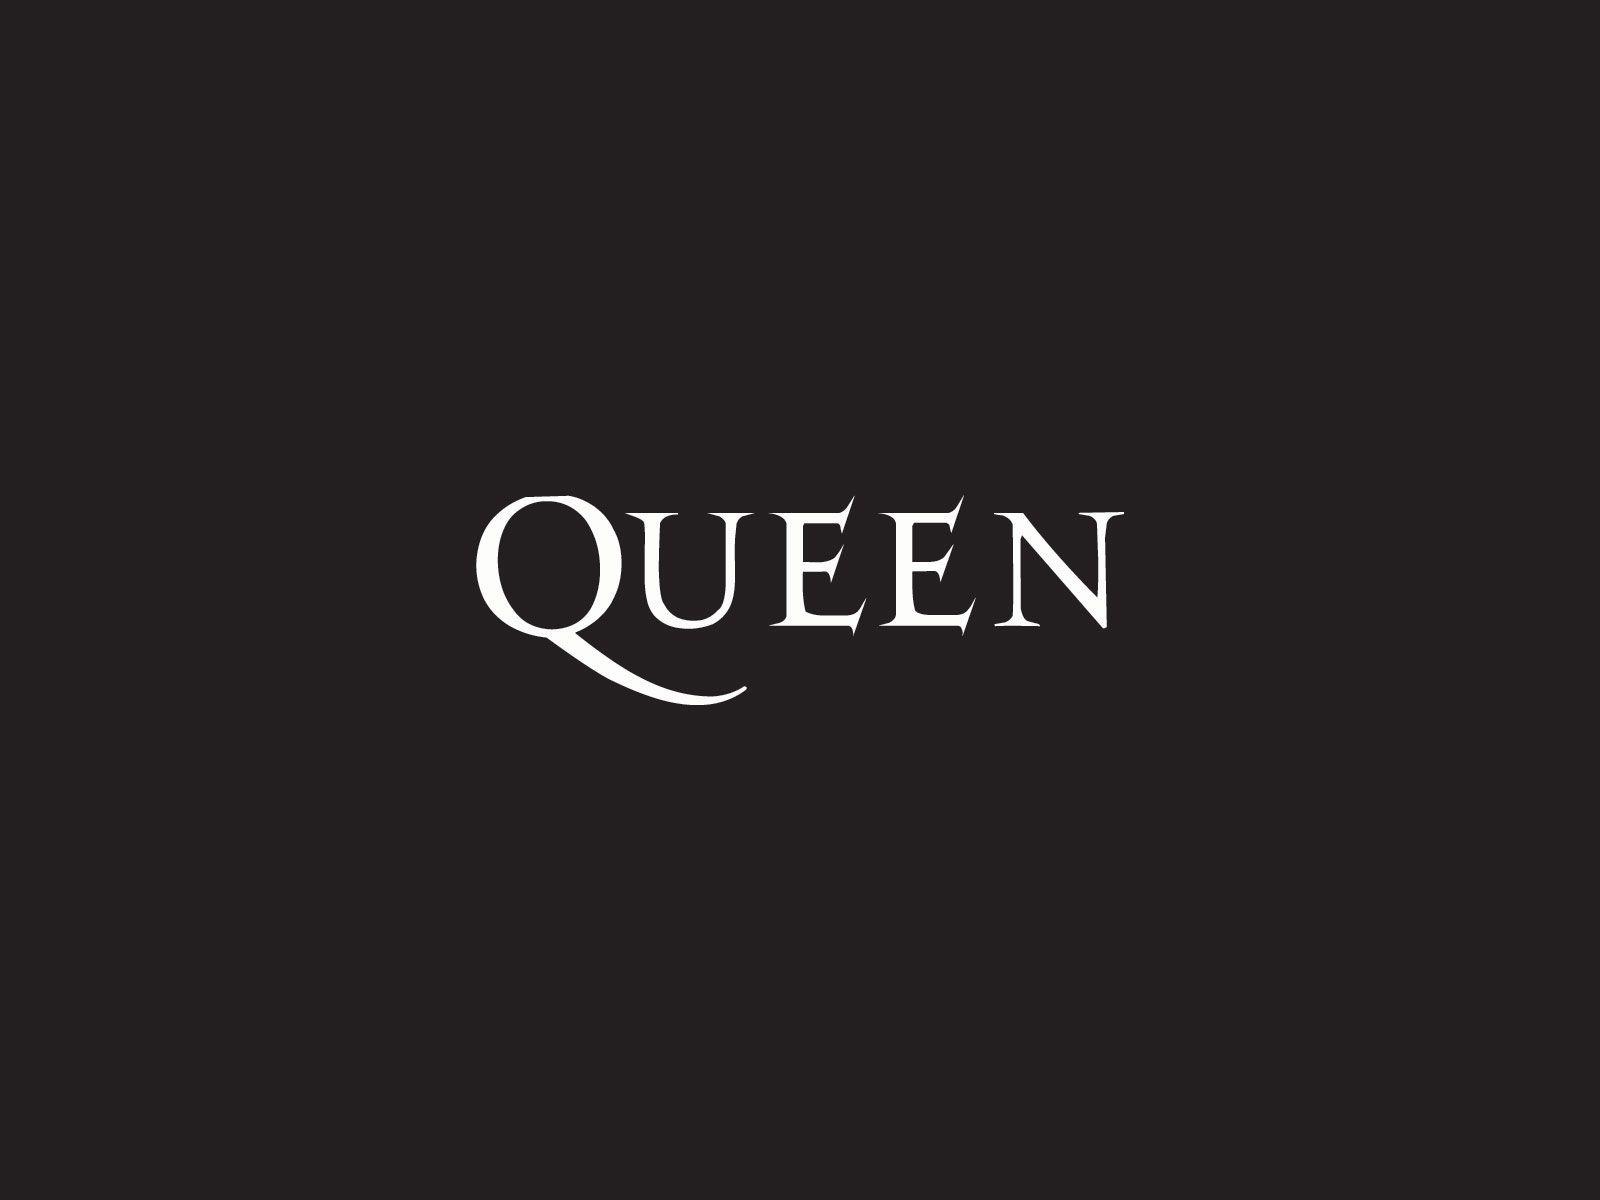 British Rock Band Logo - Pin by Kimberly Wies on Design - Logo - Bands in 2019 | Queen, Queen ...